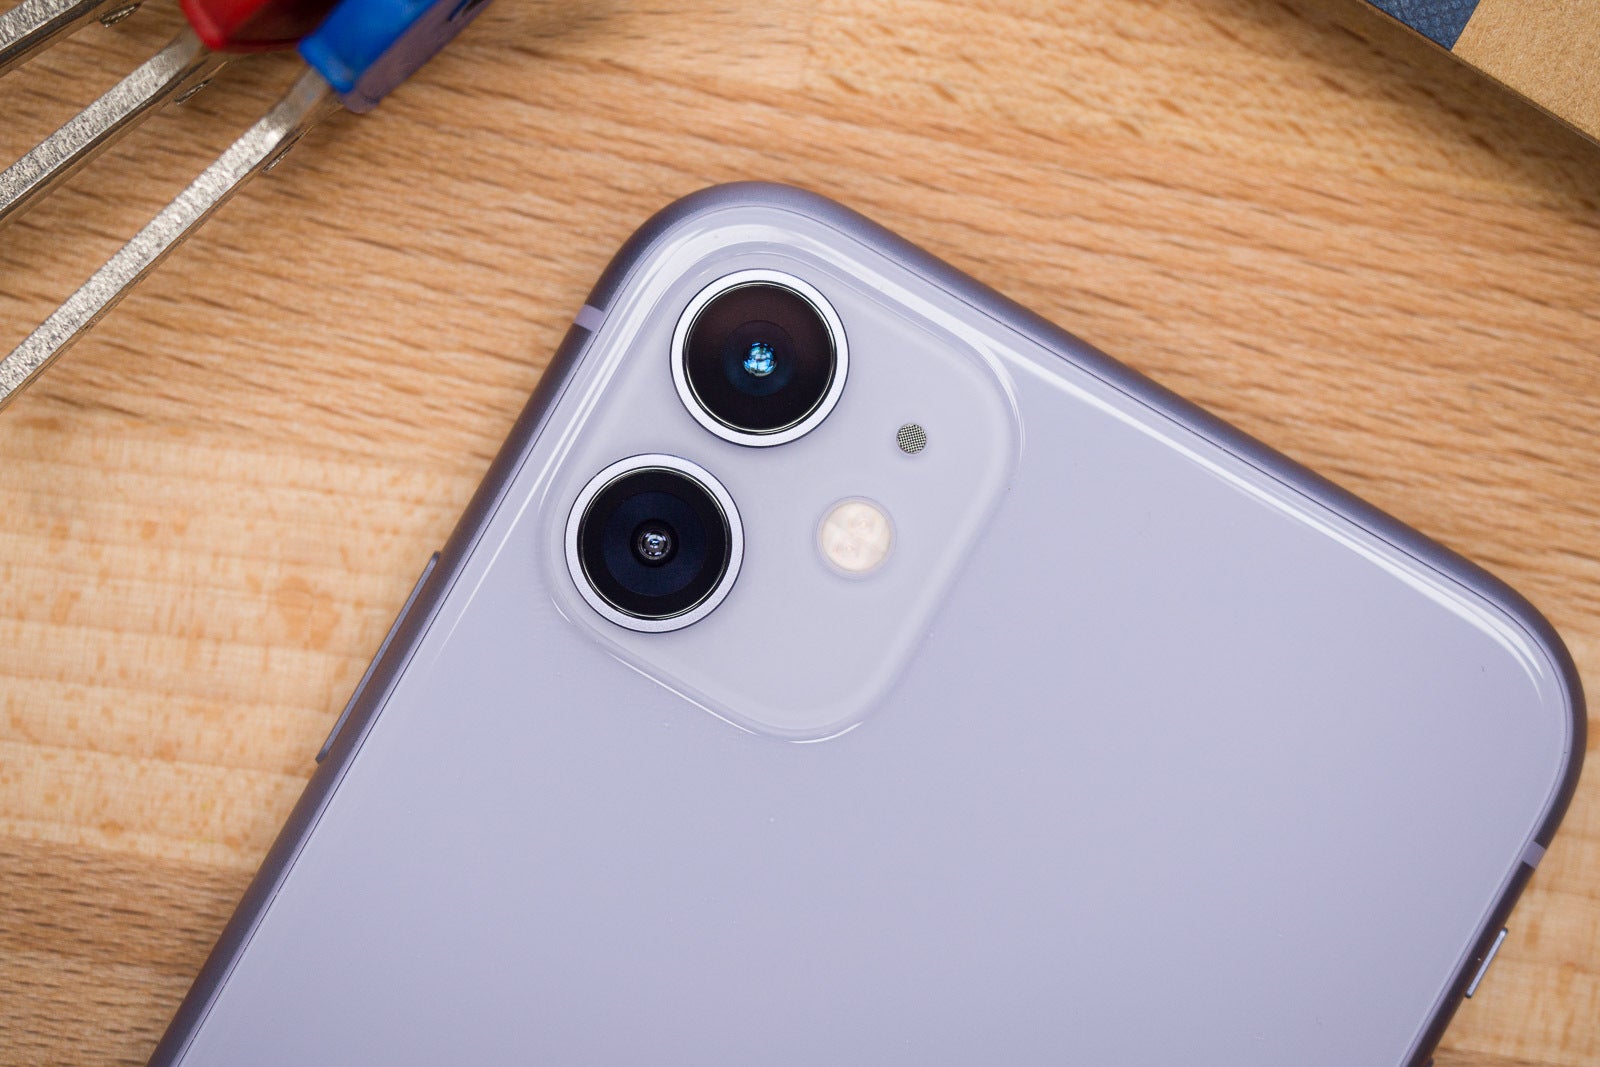 The iPhone 11 - Apple working on two AR/VR headsets, but strategy has led to disagreements